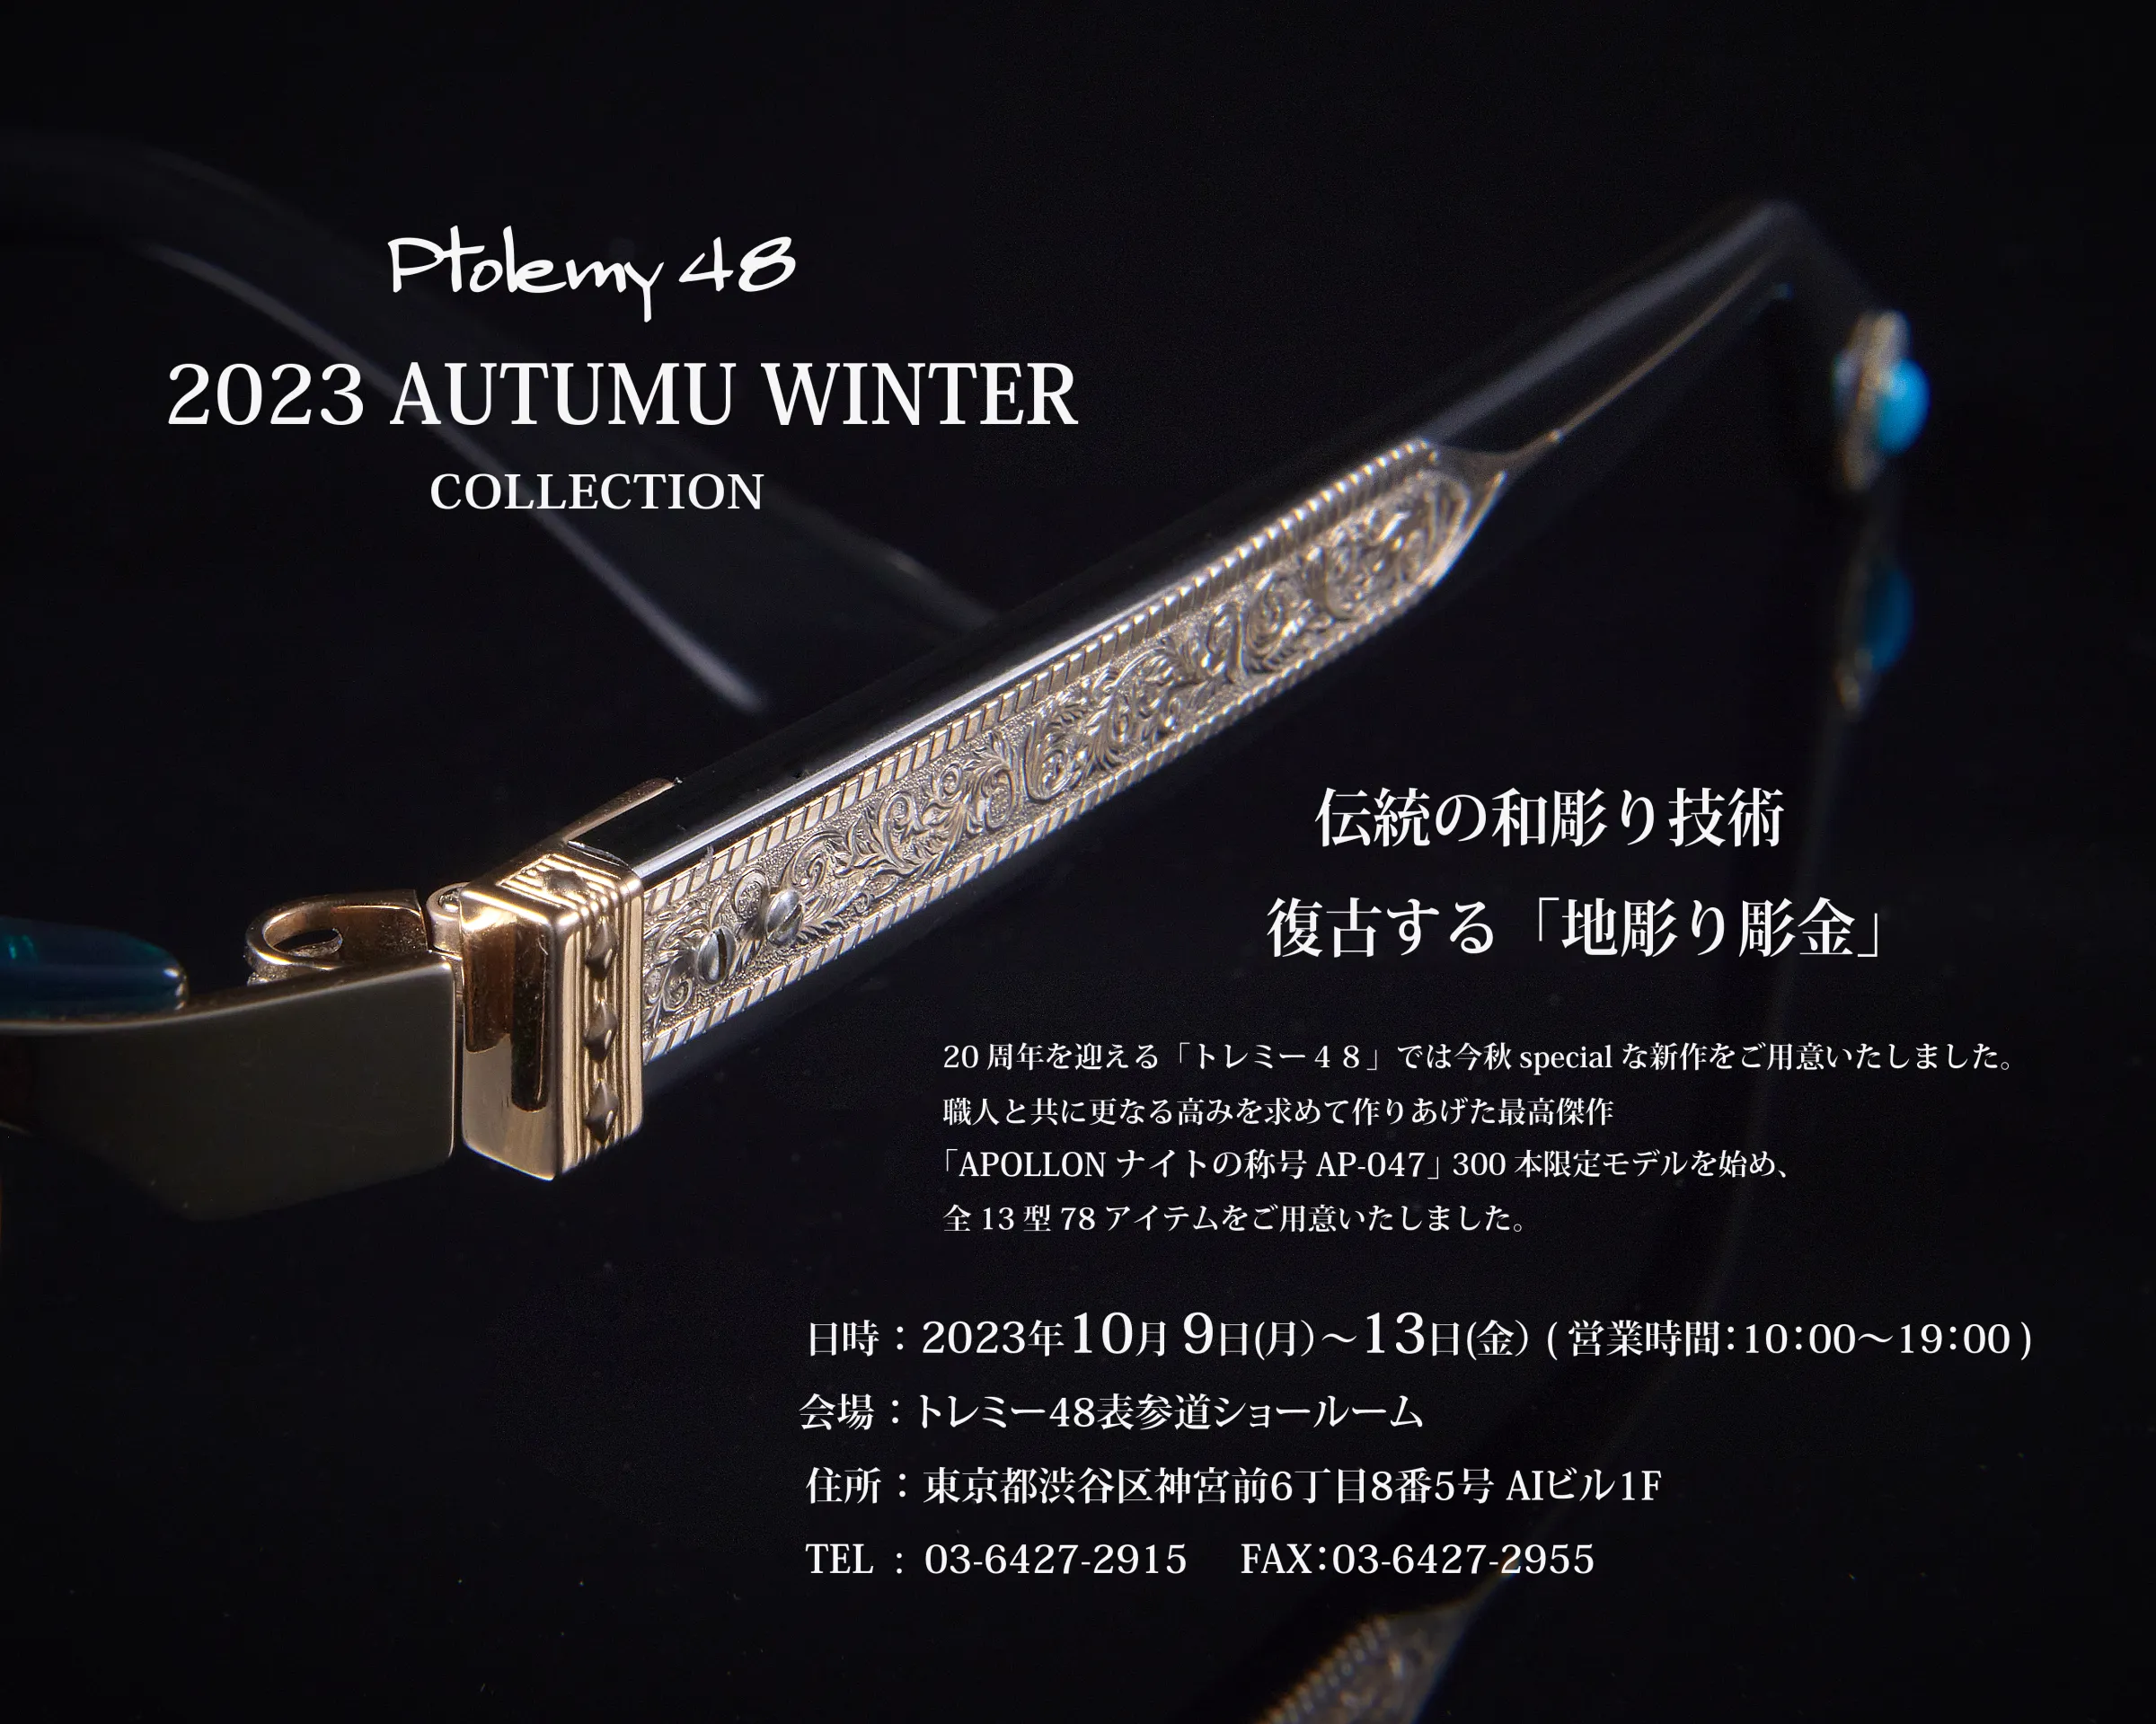 「Ptolemy48 NEW Collection」2023展示会のご案内